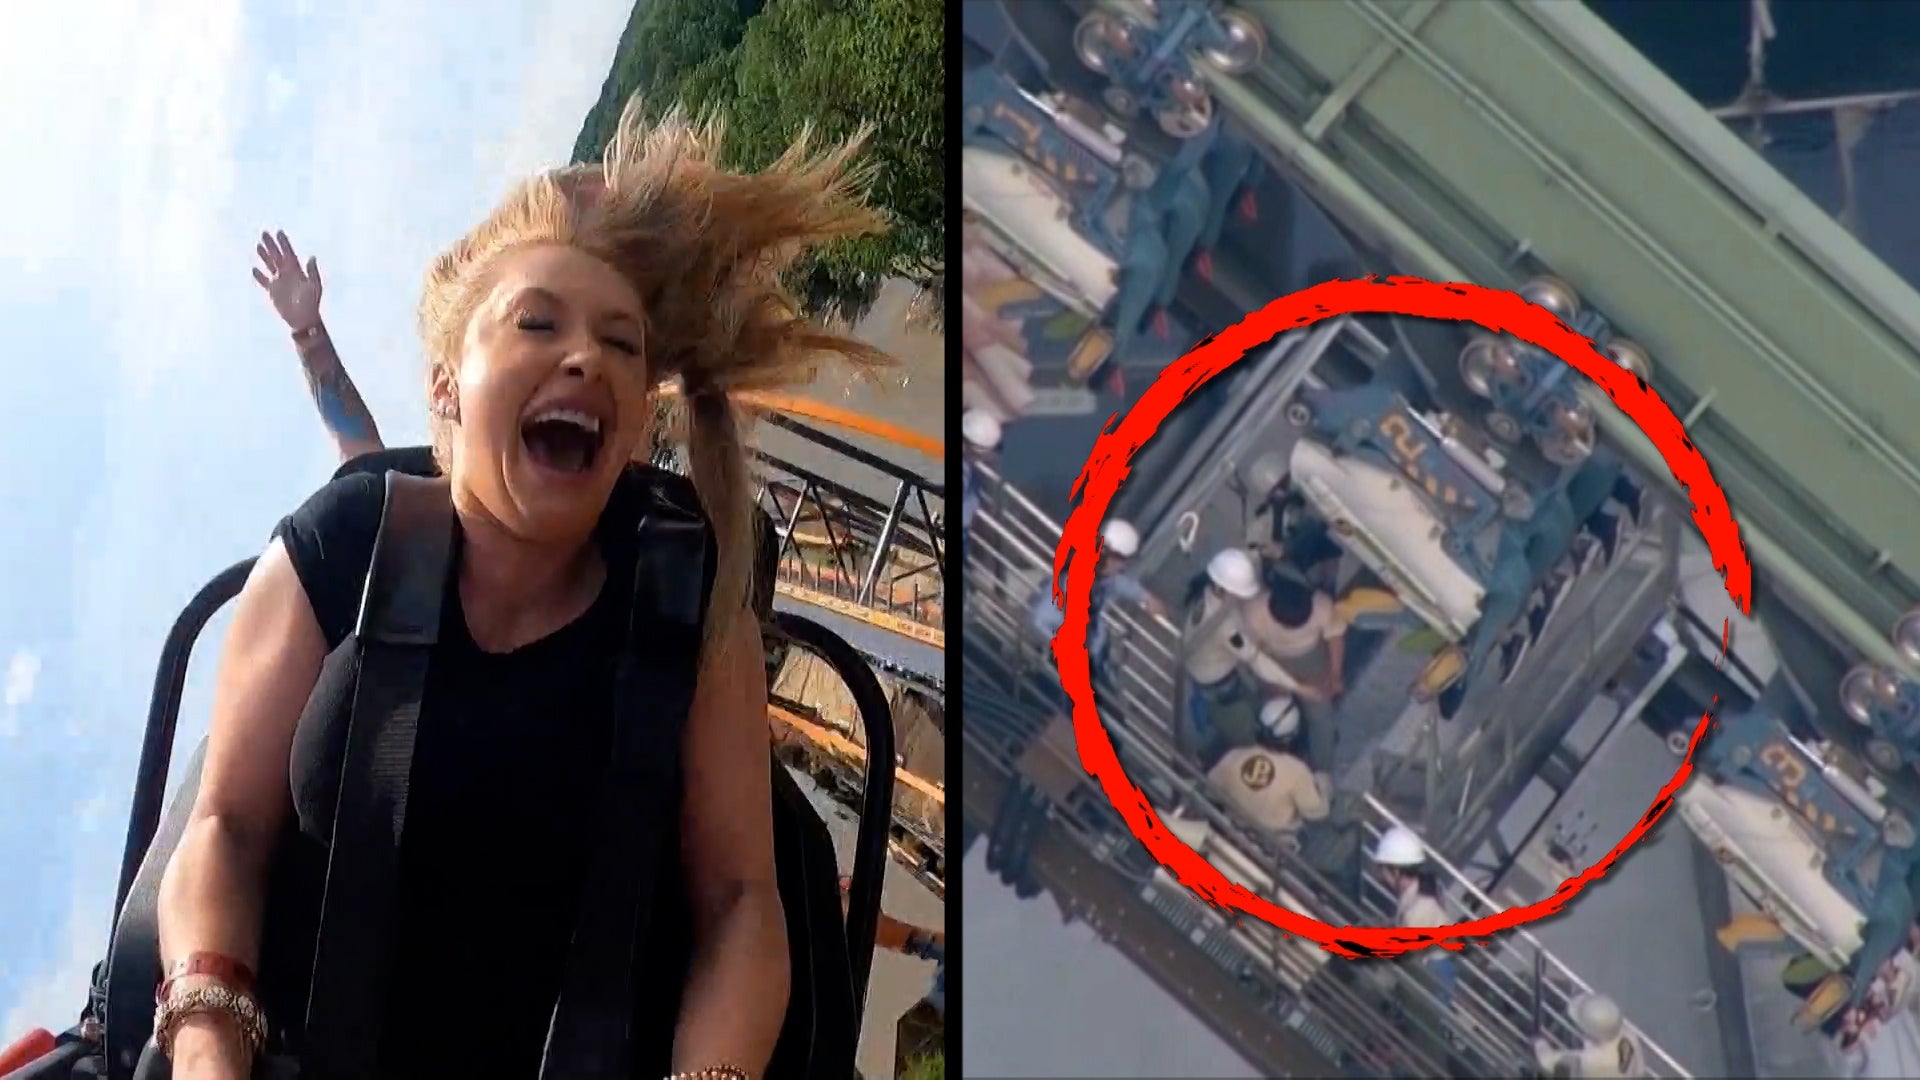 Naked Roller Coaster Rides And Other Unusual Amusement Parks Happenings Inside Edition 8596